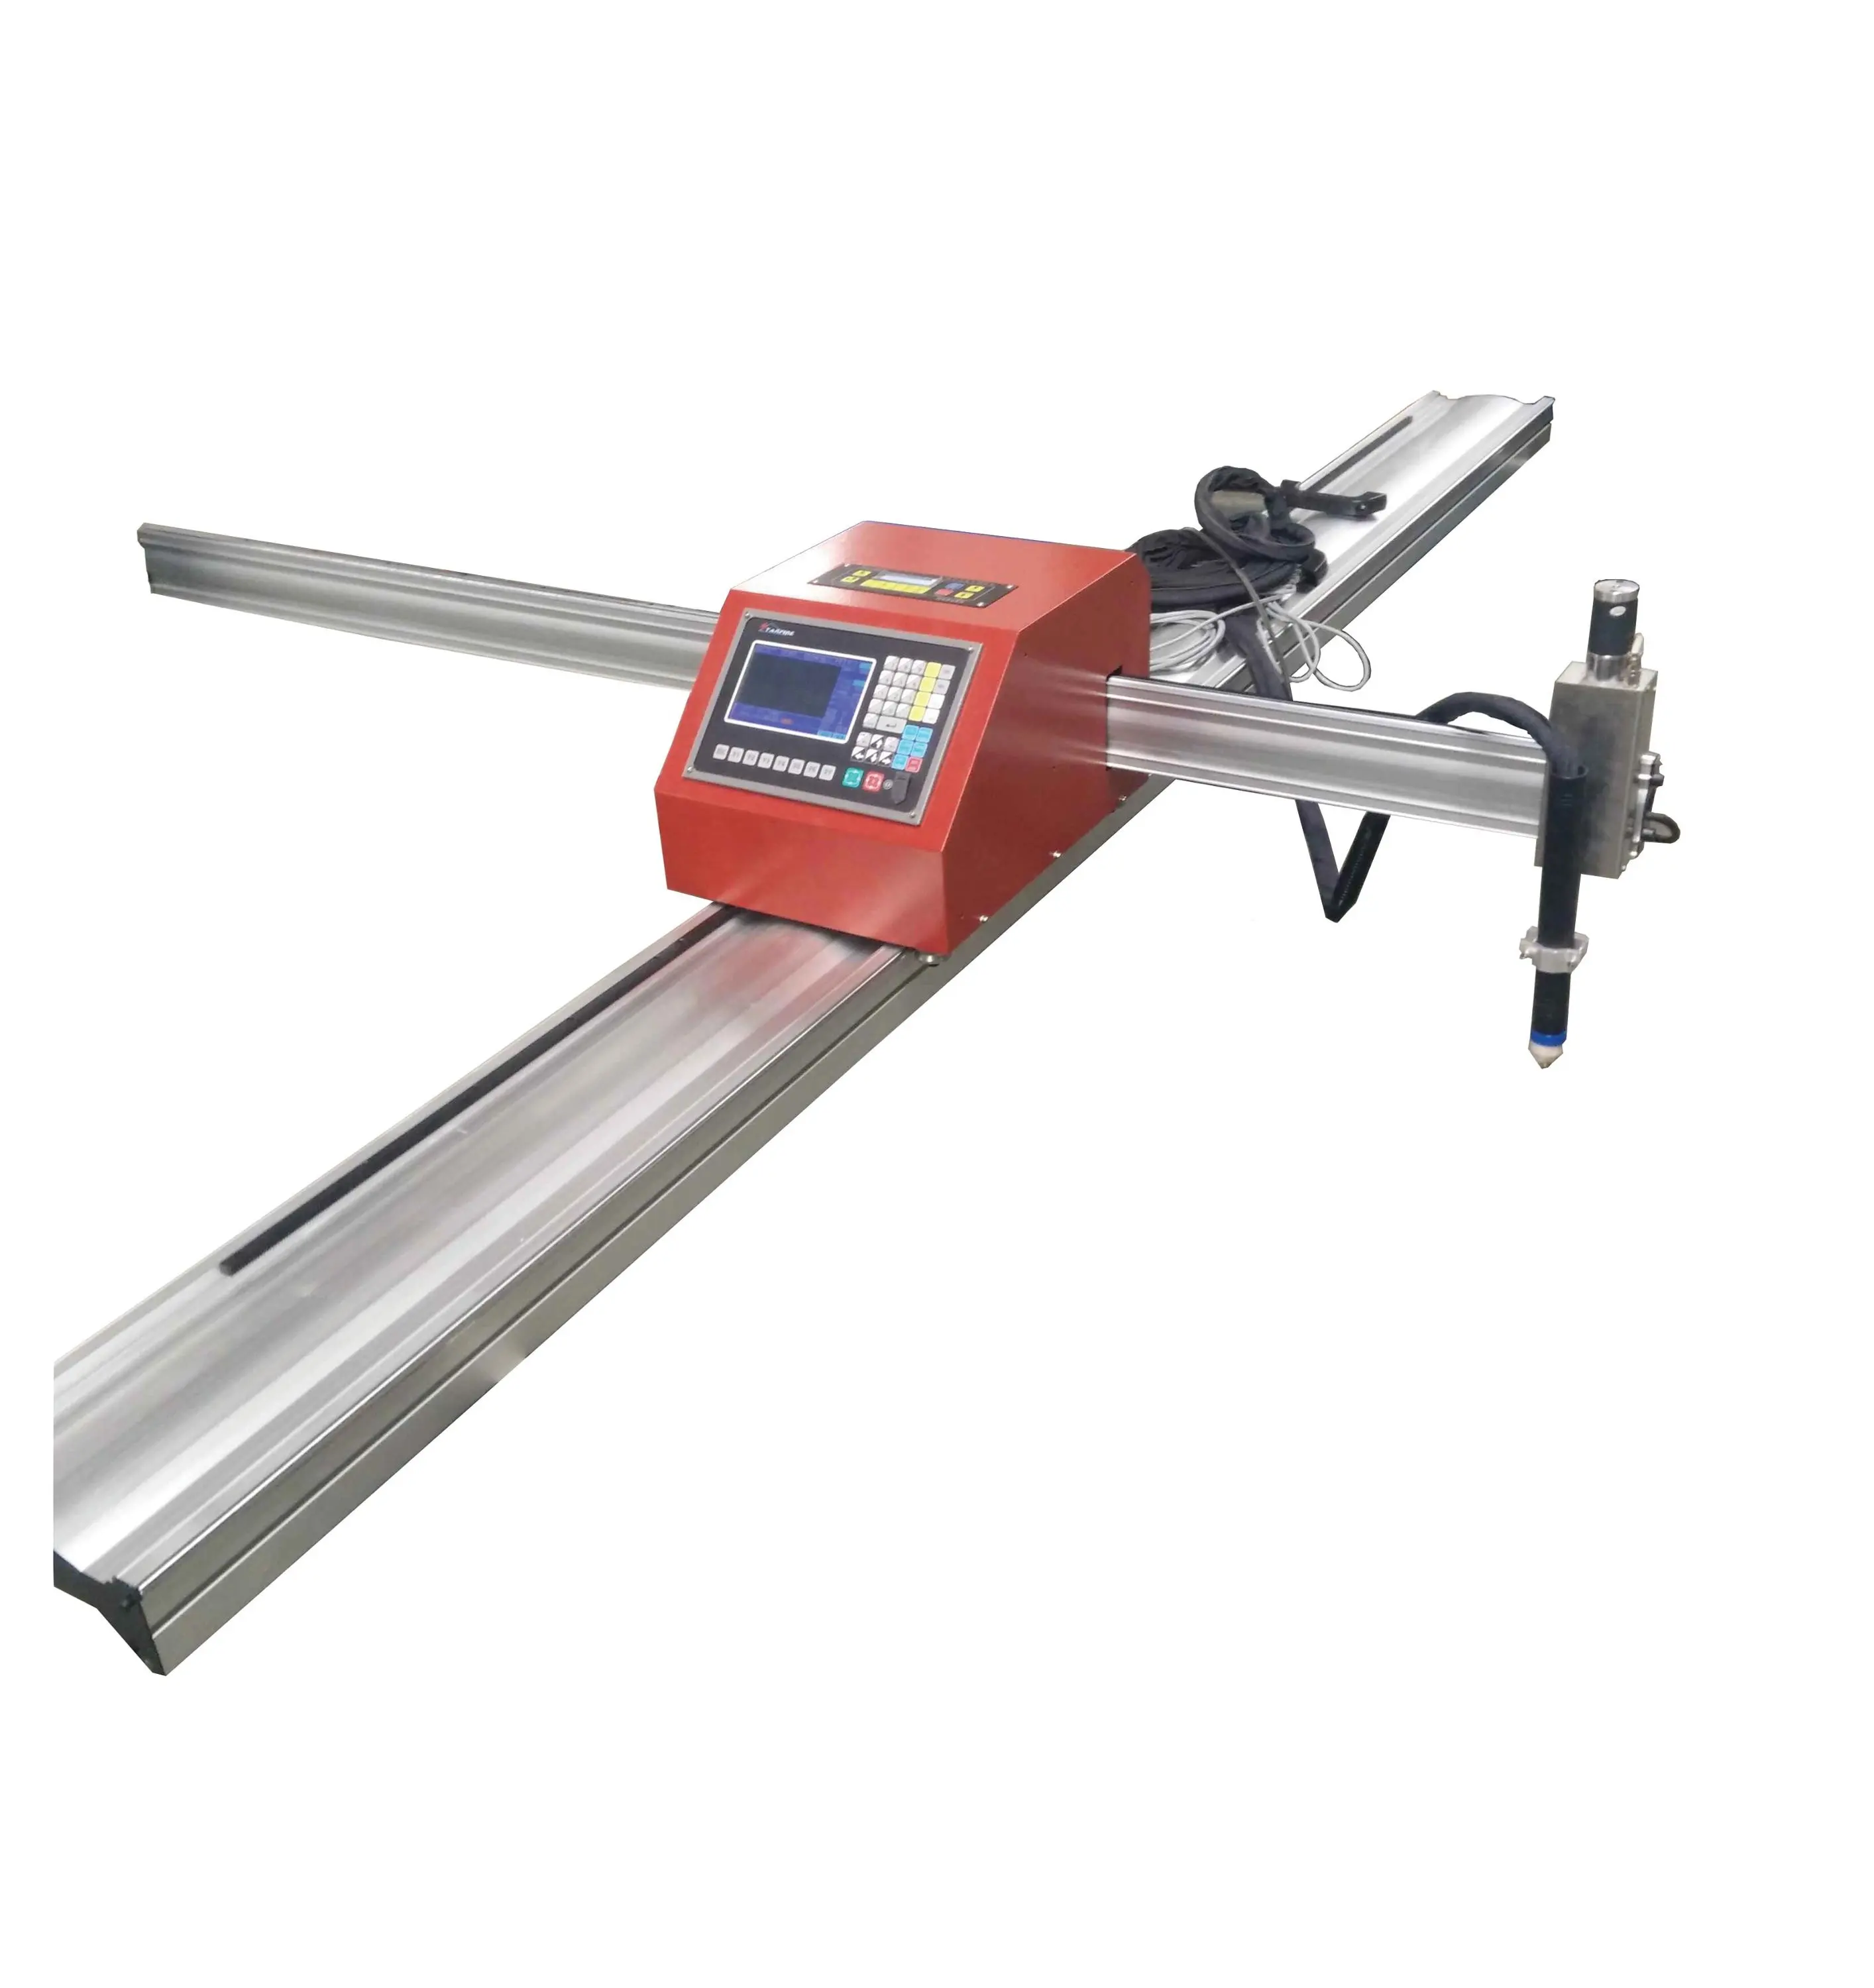 Hot Selling Portable Plasma Cutter With Steel Rail